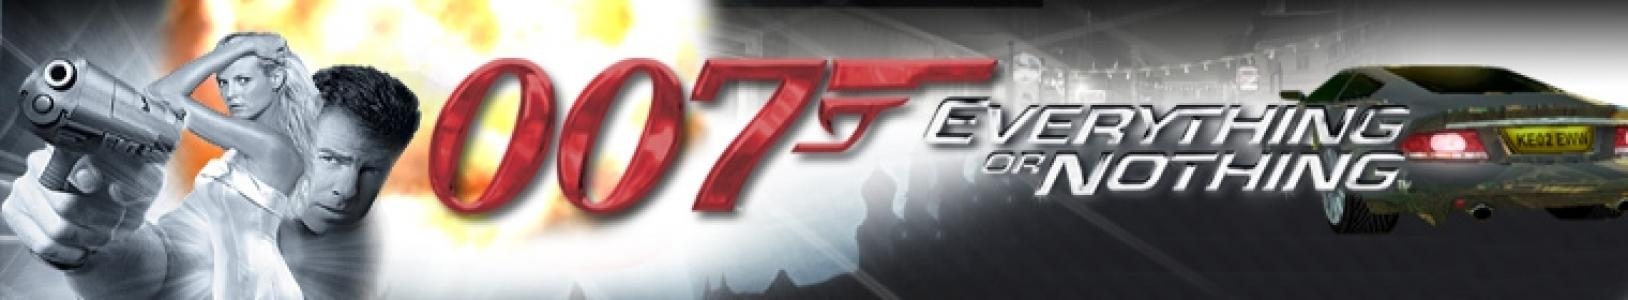 007: Everything or Nothing banner